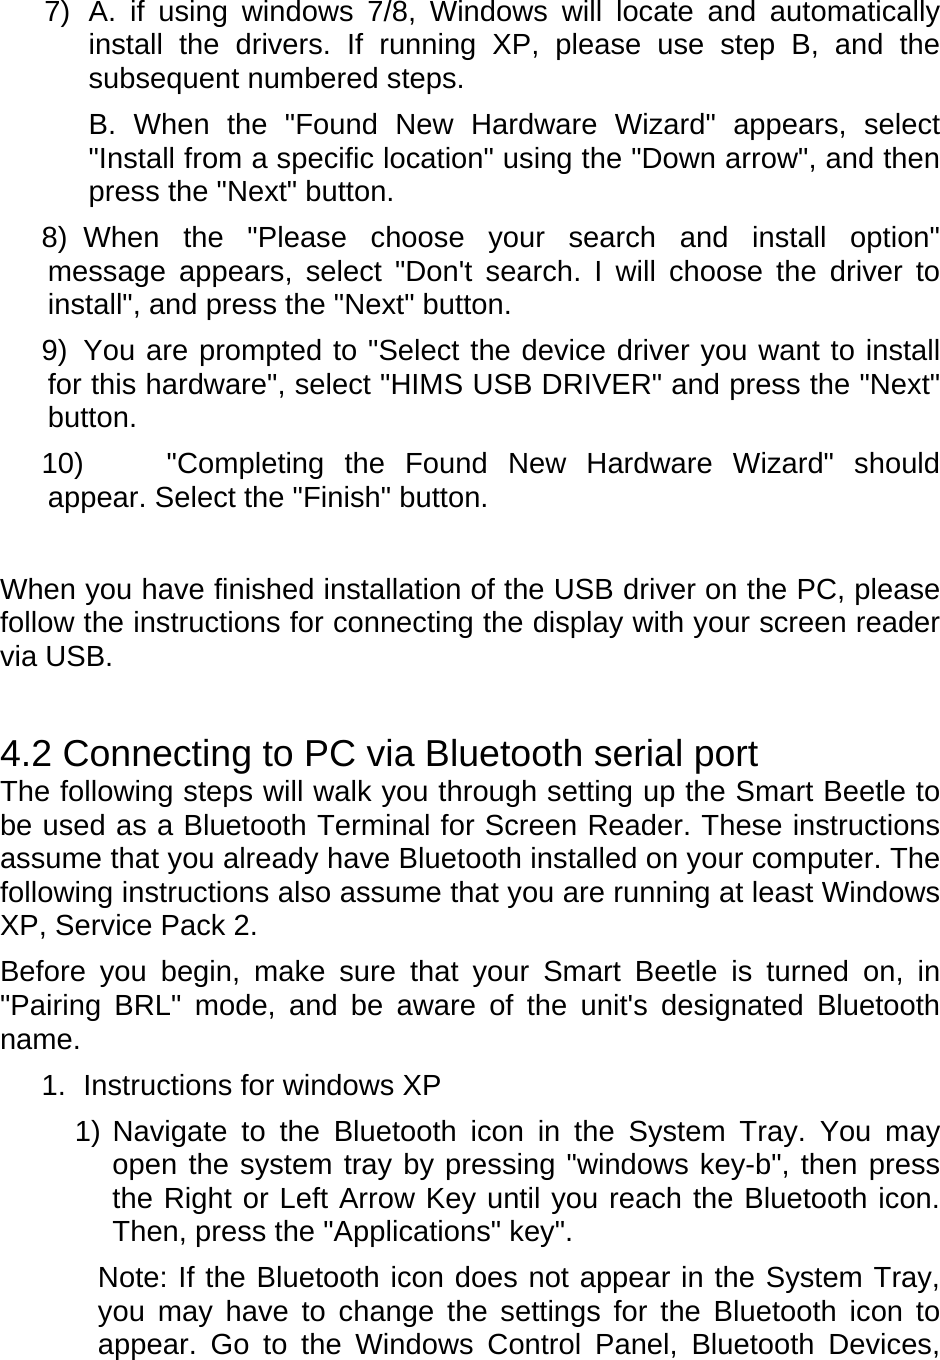 7)  A. if using windows 7/8, Windows will locate and automatically install the drivers. If running XP, please use step B, and the subsequent numbered steps. B. When the &quot;Found New Hardware Wizard&quot; appears, select &quot;Install from a specific location&quot; using the &quot;Down arrow&quot;, and then press the &quot;Next&quot; button.   8) When the &quot;Please choose your search and install option&quot; message appears, select &quot;Don&apos;t search. I will choose the driver to install&quot;, and press the &quot;Next&quot; button.   9)  You are prompted to &quot;Select the device driver you want to install for this hardware&quot;, select &quot;HIMS USB DRIVER&quot; and press the &quot;Next&quot; button.  10) &quot;Completing the Found New Hardware Wizard&quot; should appear. Select the &quot;Finish&quot; button.     When you have finished installation of the USB driver on the PC, please follow the instructions for connecting the display with your screen reader via USB.   4.2 Connecting to PC via Bluetooth serial port The following steps will walk you through setting up the Smart Beetle to be used as a Bluetooth Terminal for Screen Reader. These instructions assume that you already have Bluetooth installed on your computer. The following instructions also assume that you are running at least Windows XP, Service Pack 2. Before you begin, make sure that your Smart Beetle is turned on, in &quot;Pairing BRL&quot; mode, and be aware of the unit&apos;s designated Bluetooth name. 1.  Instructions for windows XP 1) Navigate to the Bluetooth icon in the System Tray. You may open the system tray by pressing &quot;windows key-b&quot;, then press the Right or Left Arrow Key until you reach the Bluetooth icon. Then, press the &quot;Applications&quot; key&quot;.   Note: If the Bluetooth icon does not appear in the System Tray, you may have to change the settings for the Bluetooth icon to appear. Go to the Windows Control Panel, Bluetooth Devices, 